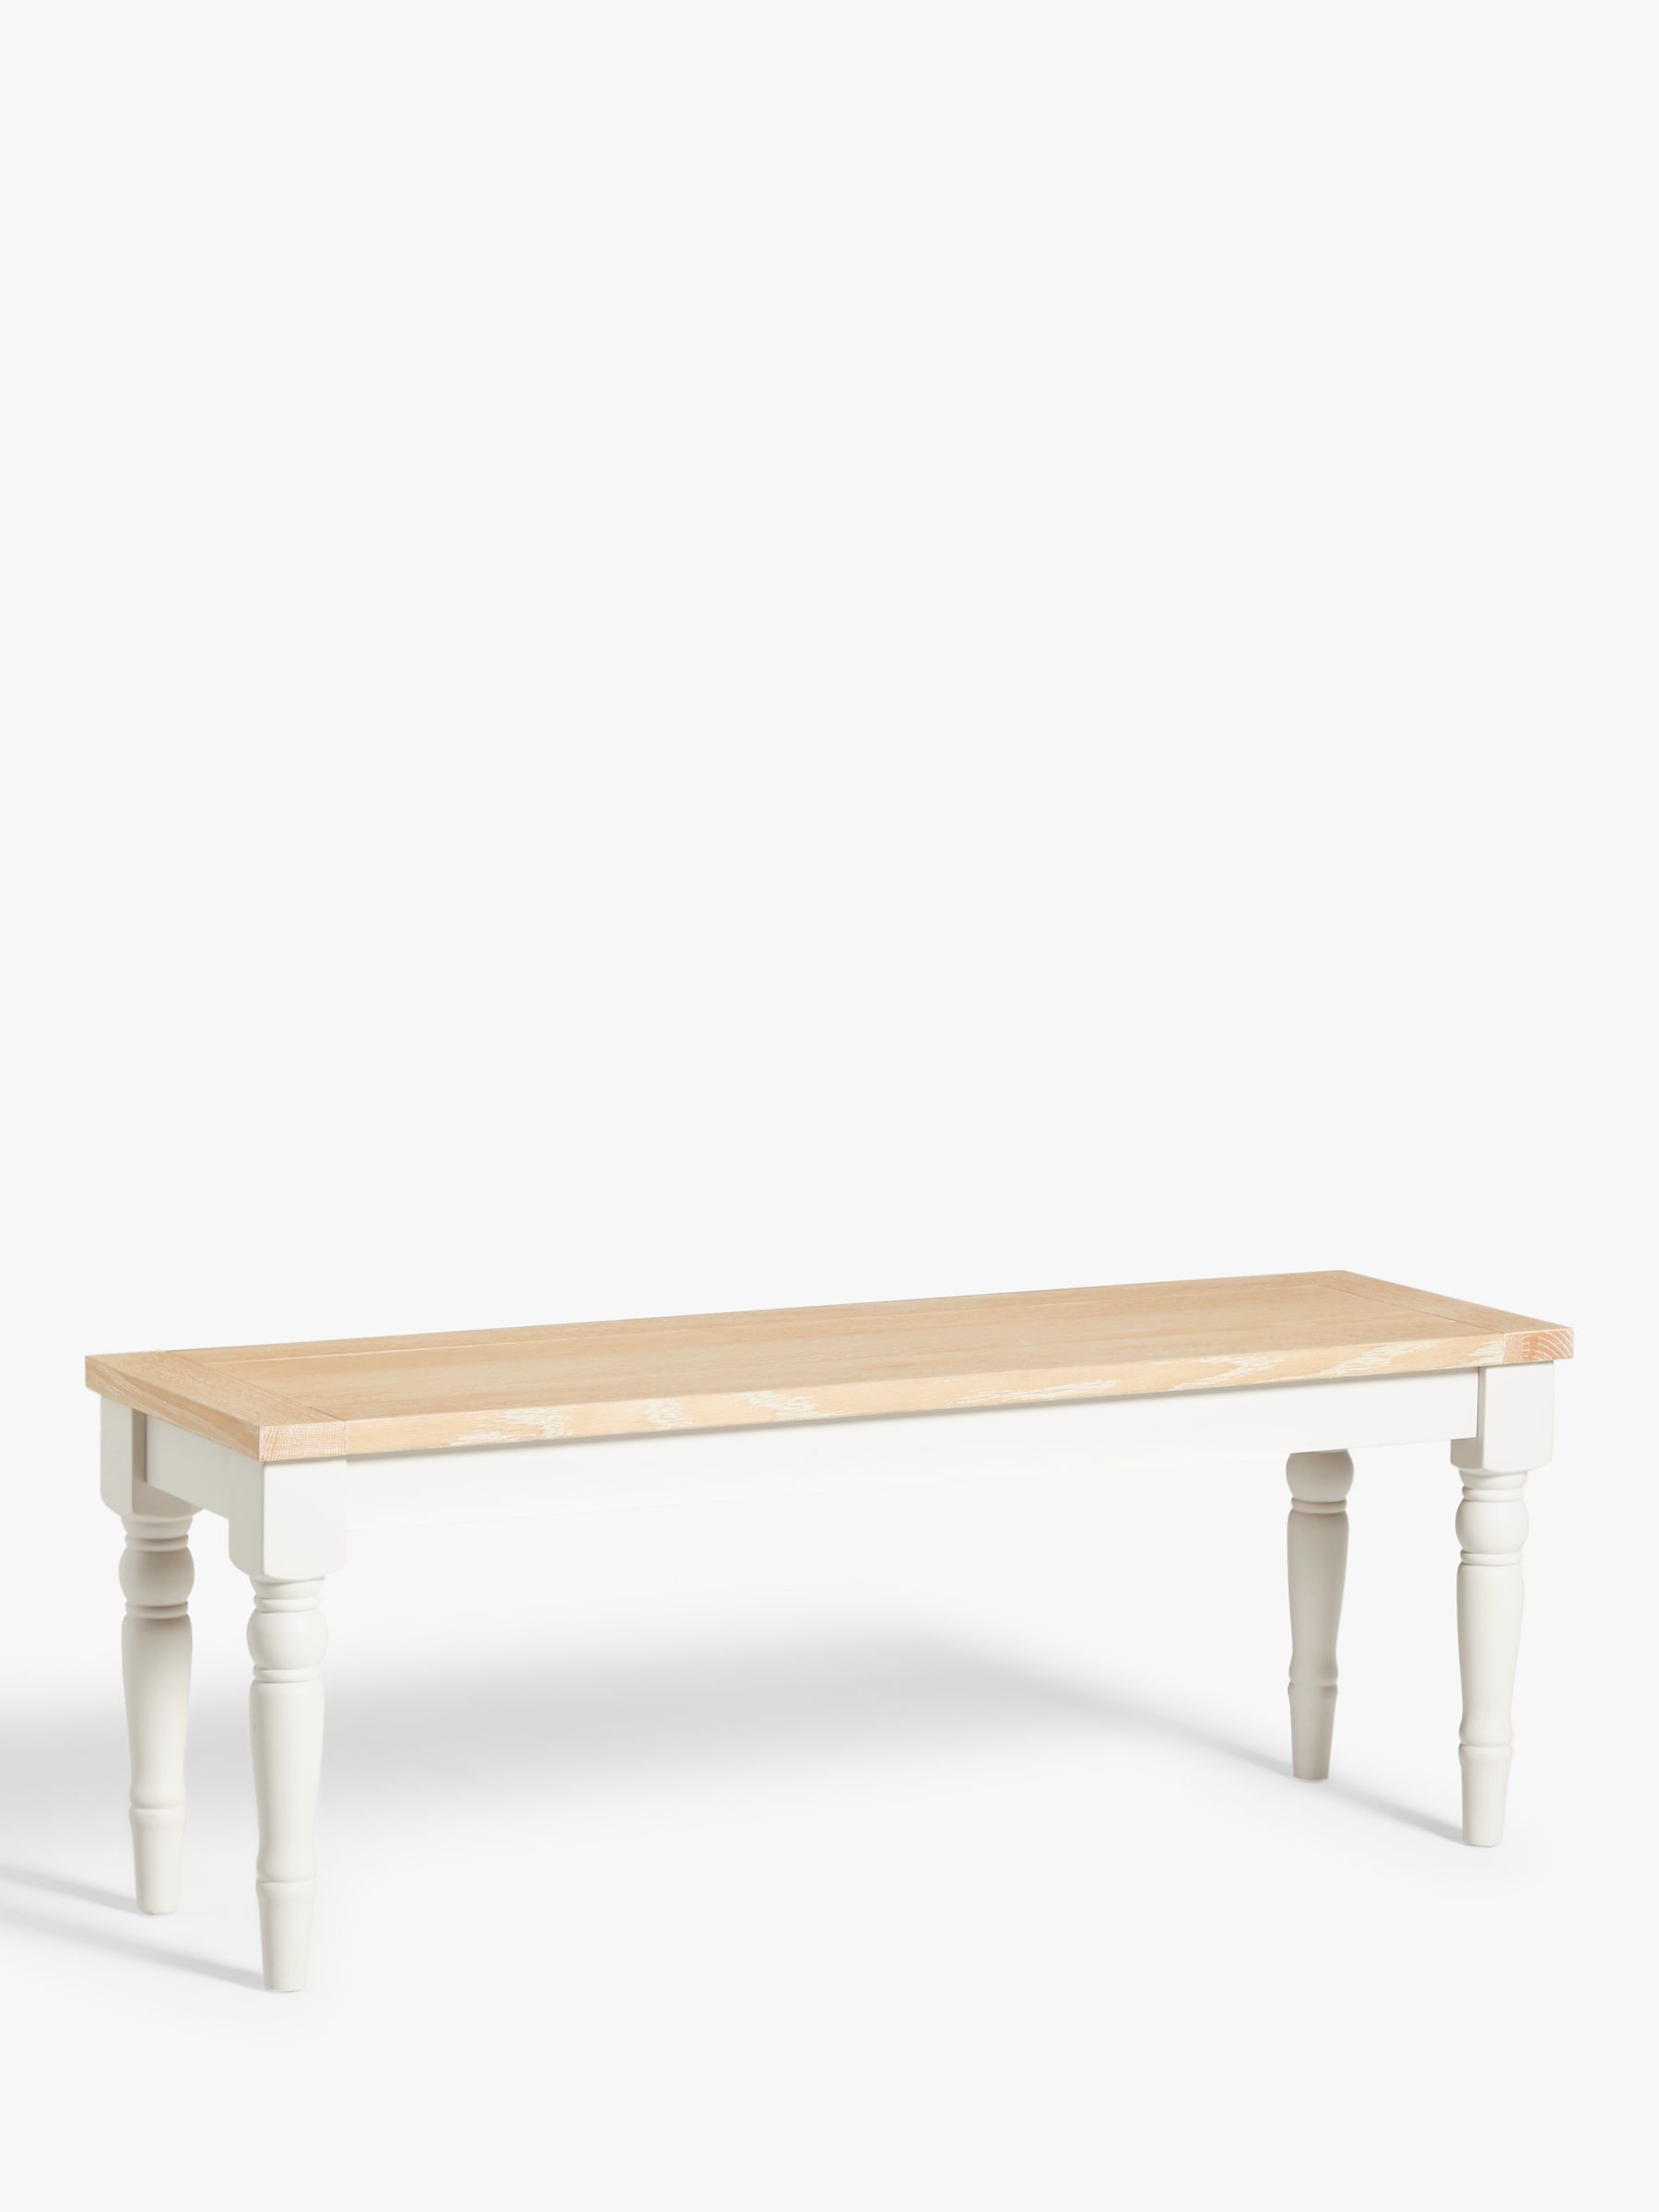 Photo of John lewis foxmoor 2 seater dining bench fsc-certified -acacia wood-